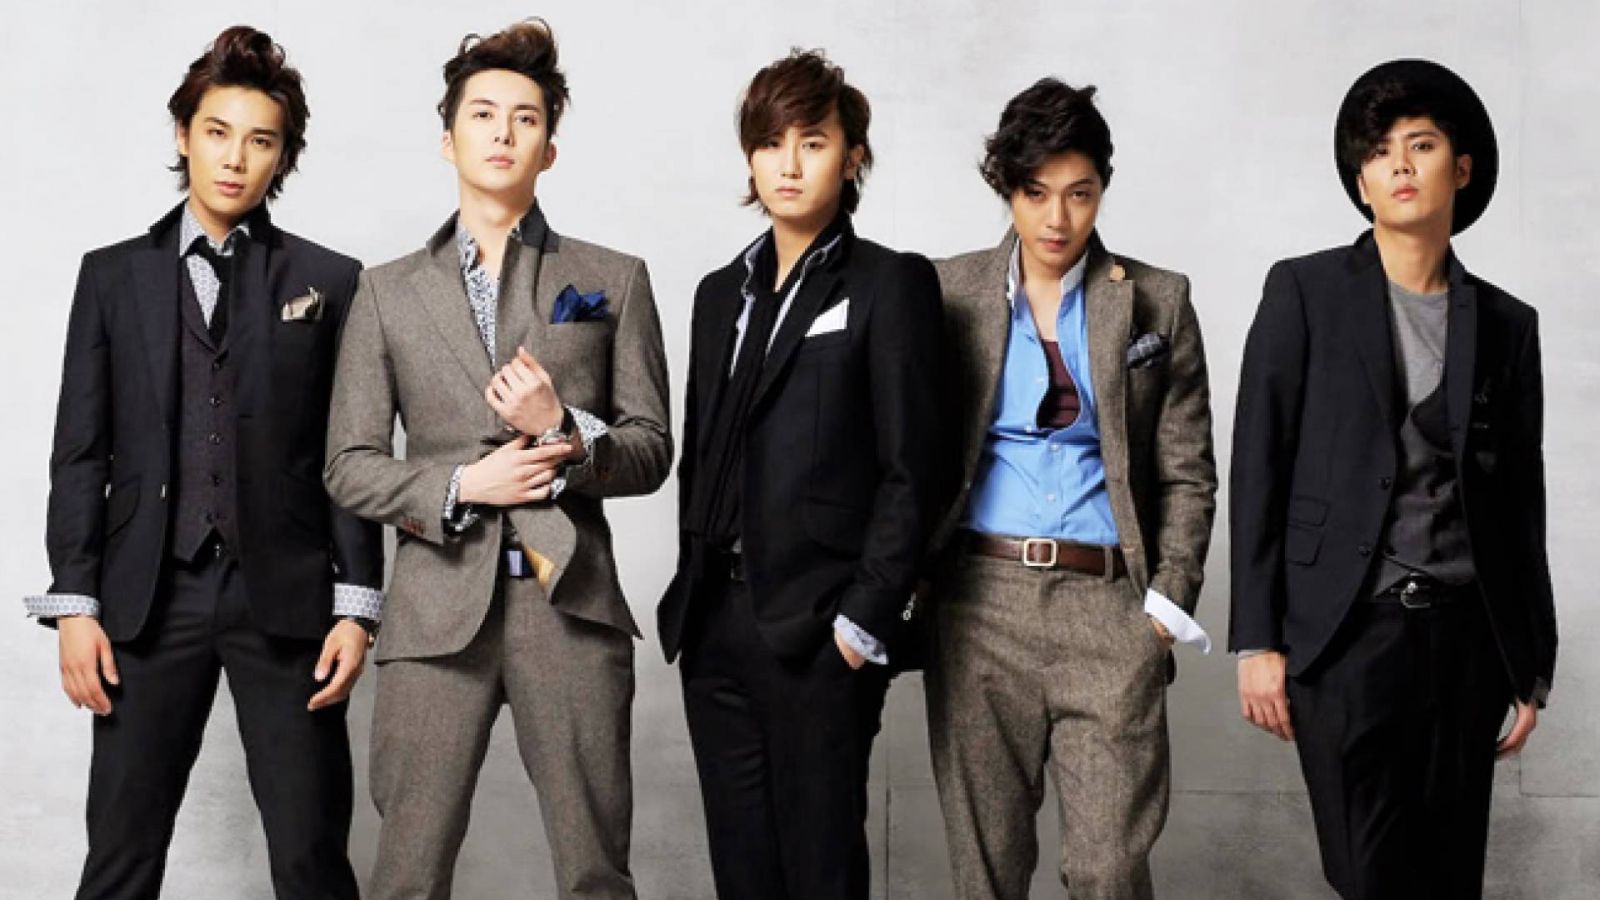 SS501 © DSP Entertainment